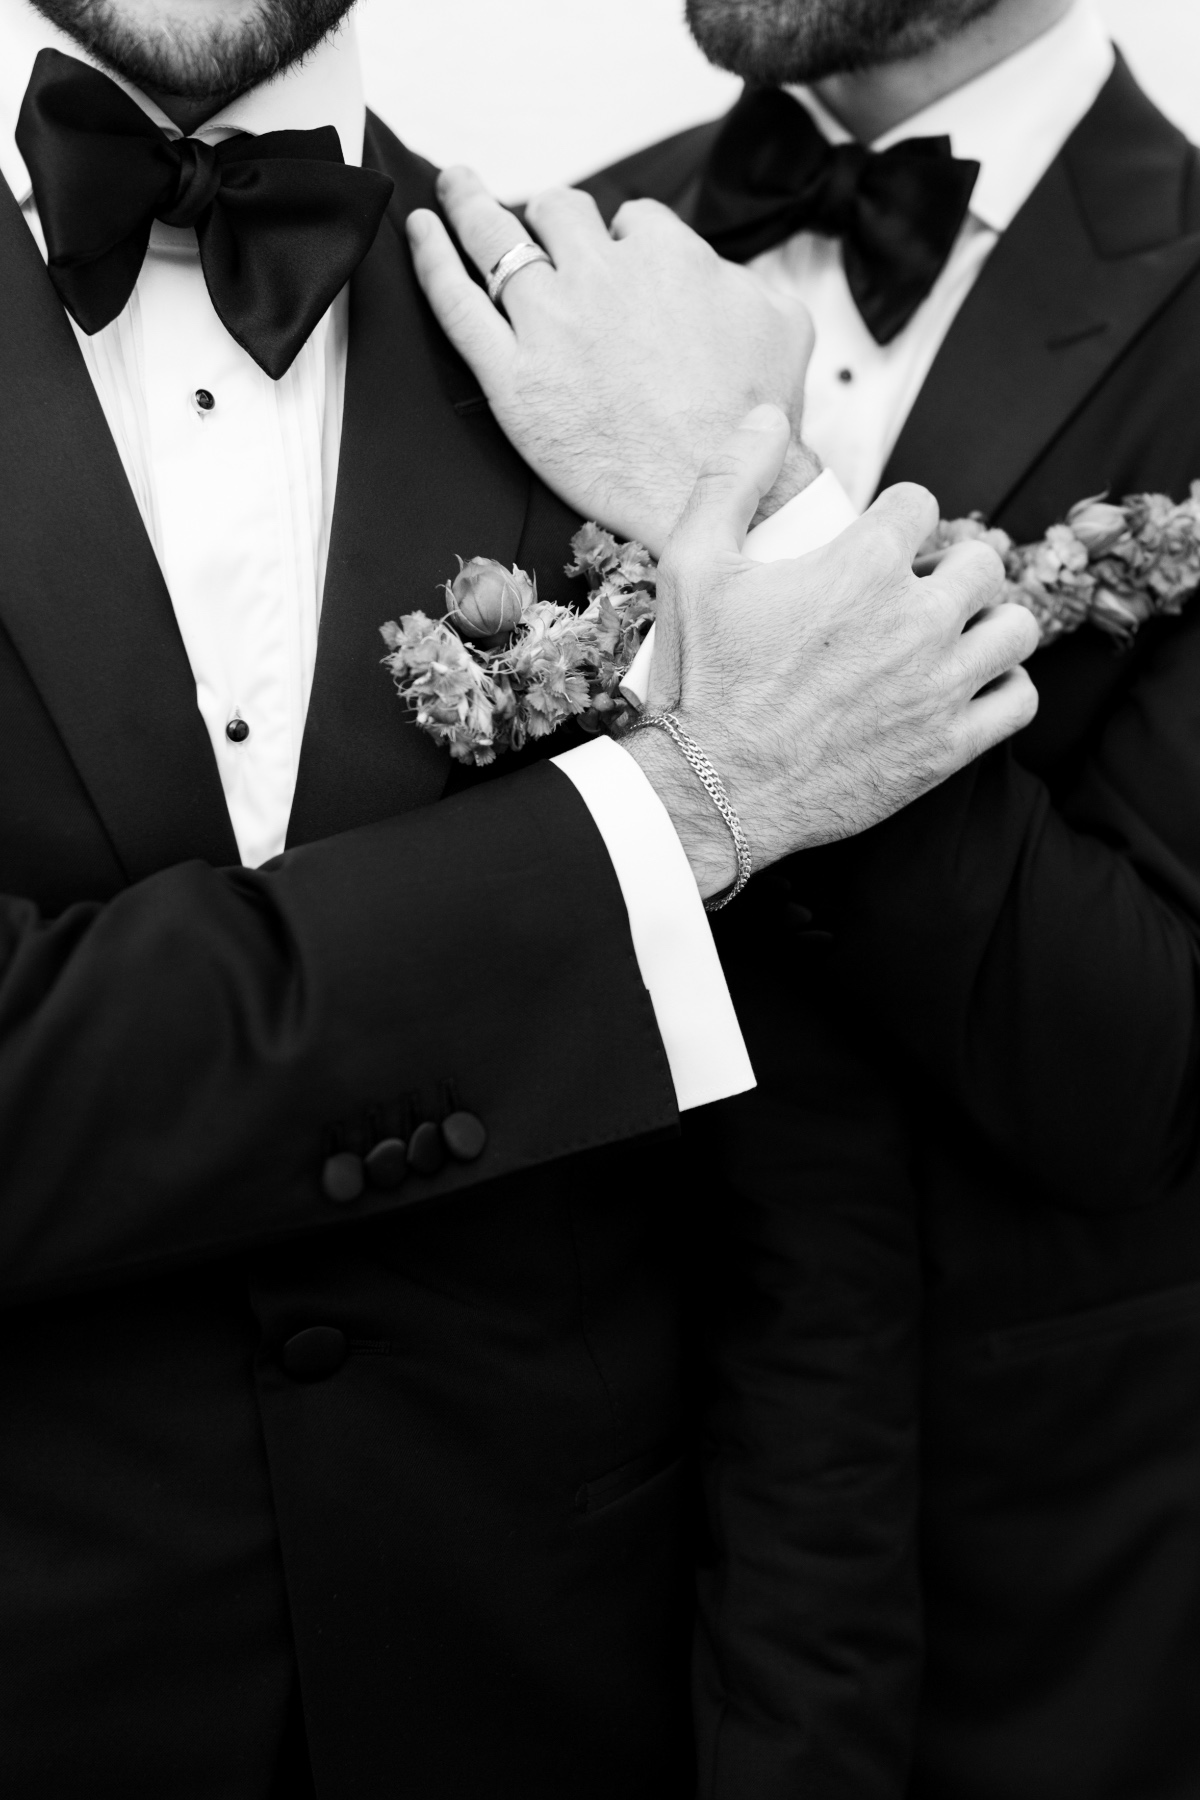 Fashionable grooms in black tuxedos and gold accessories 